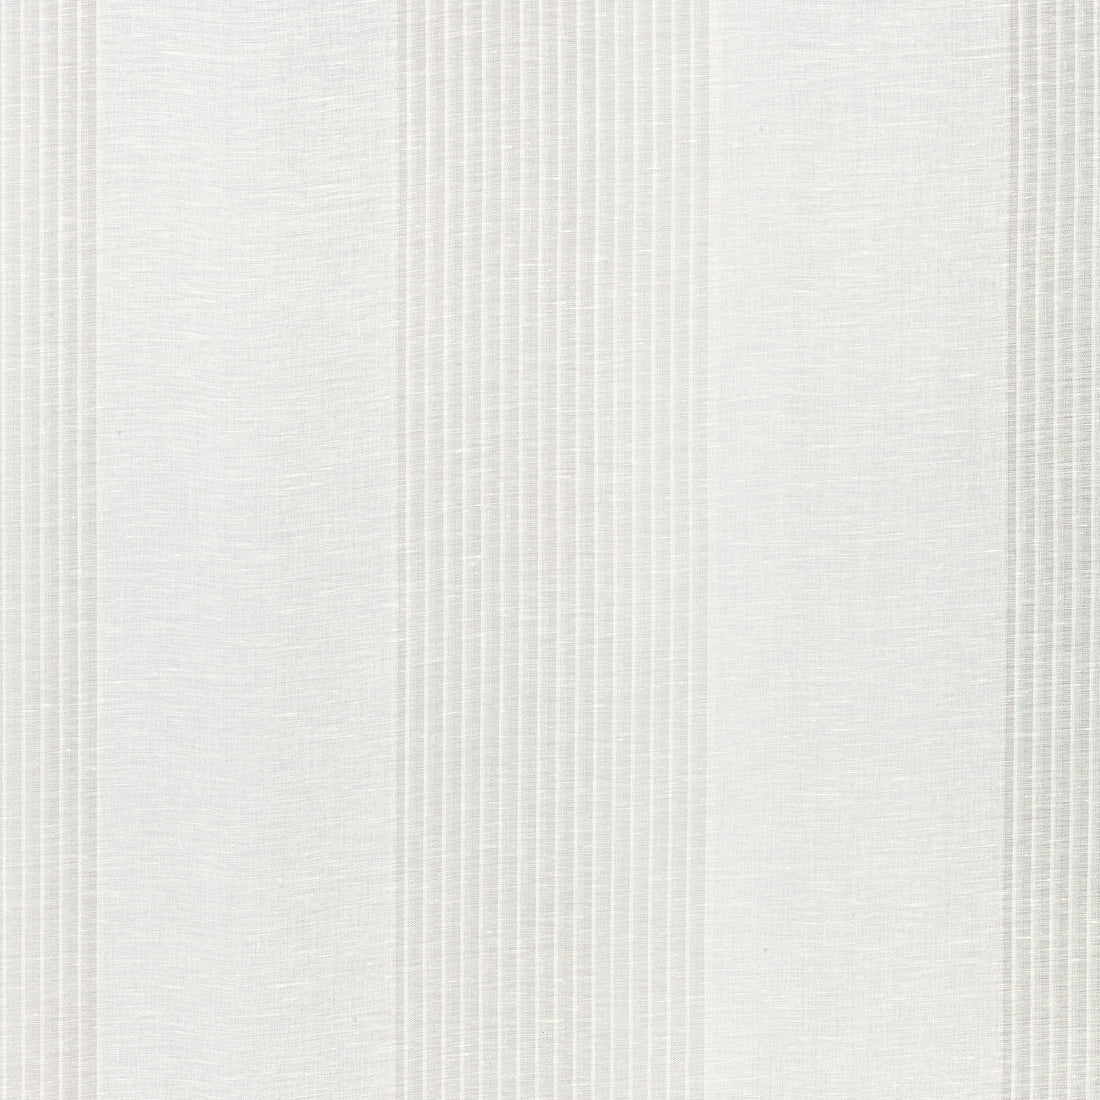 Mystic Stripe fabric in mist color - pattern number FWW7113 - by Thibaut in the Atmosphere collection